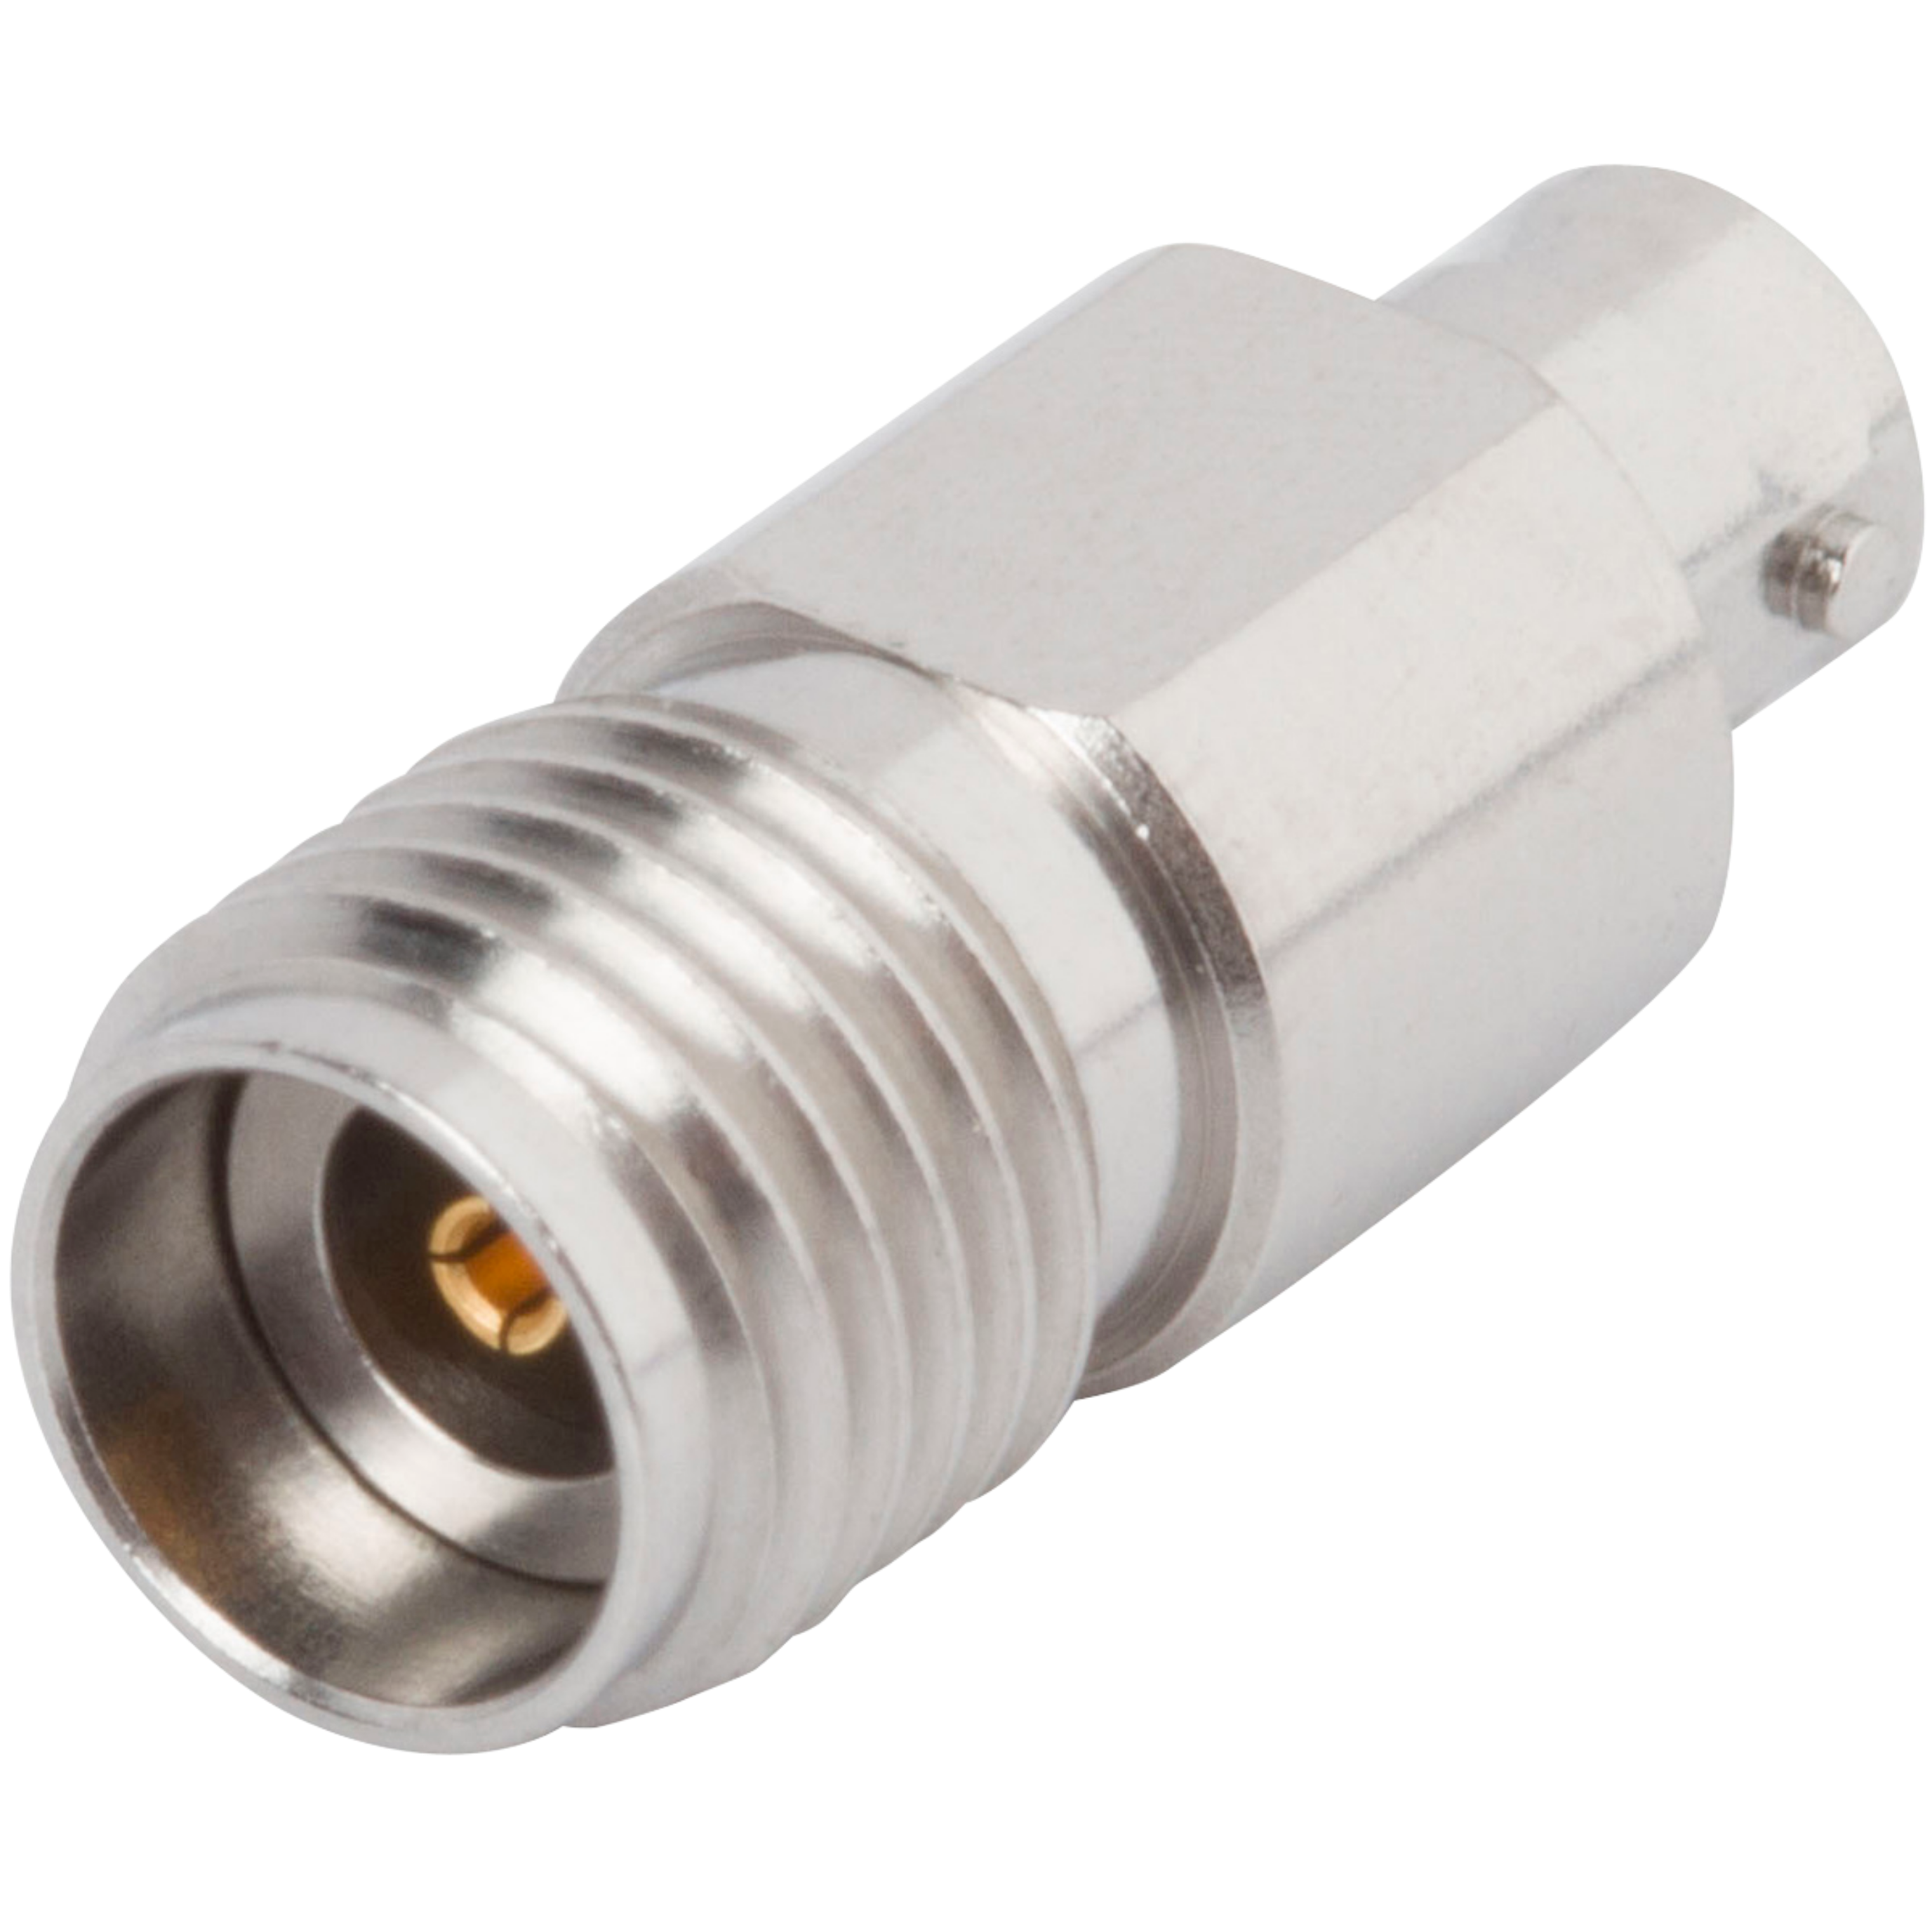 2.92mm Female to SMPM Male QB Adapter, SF1132-6078